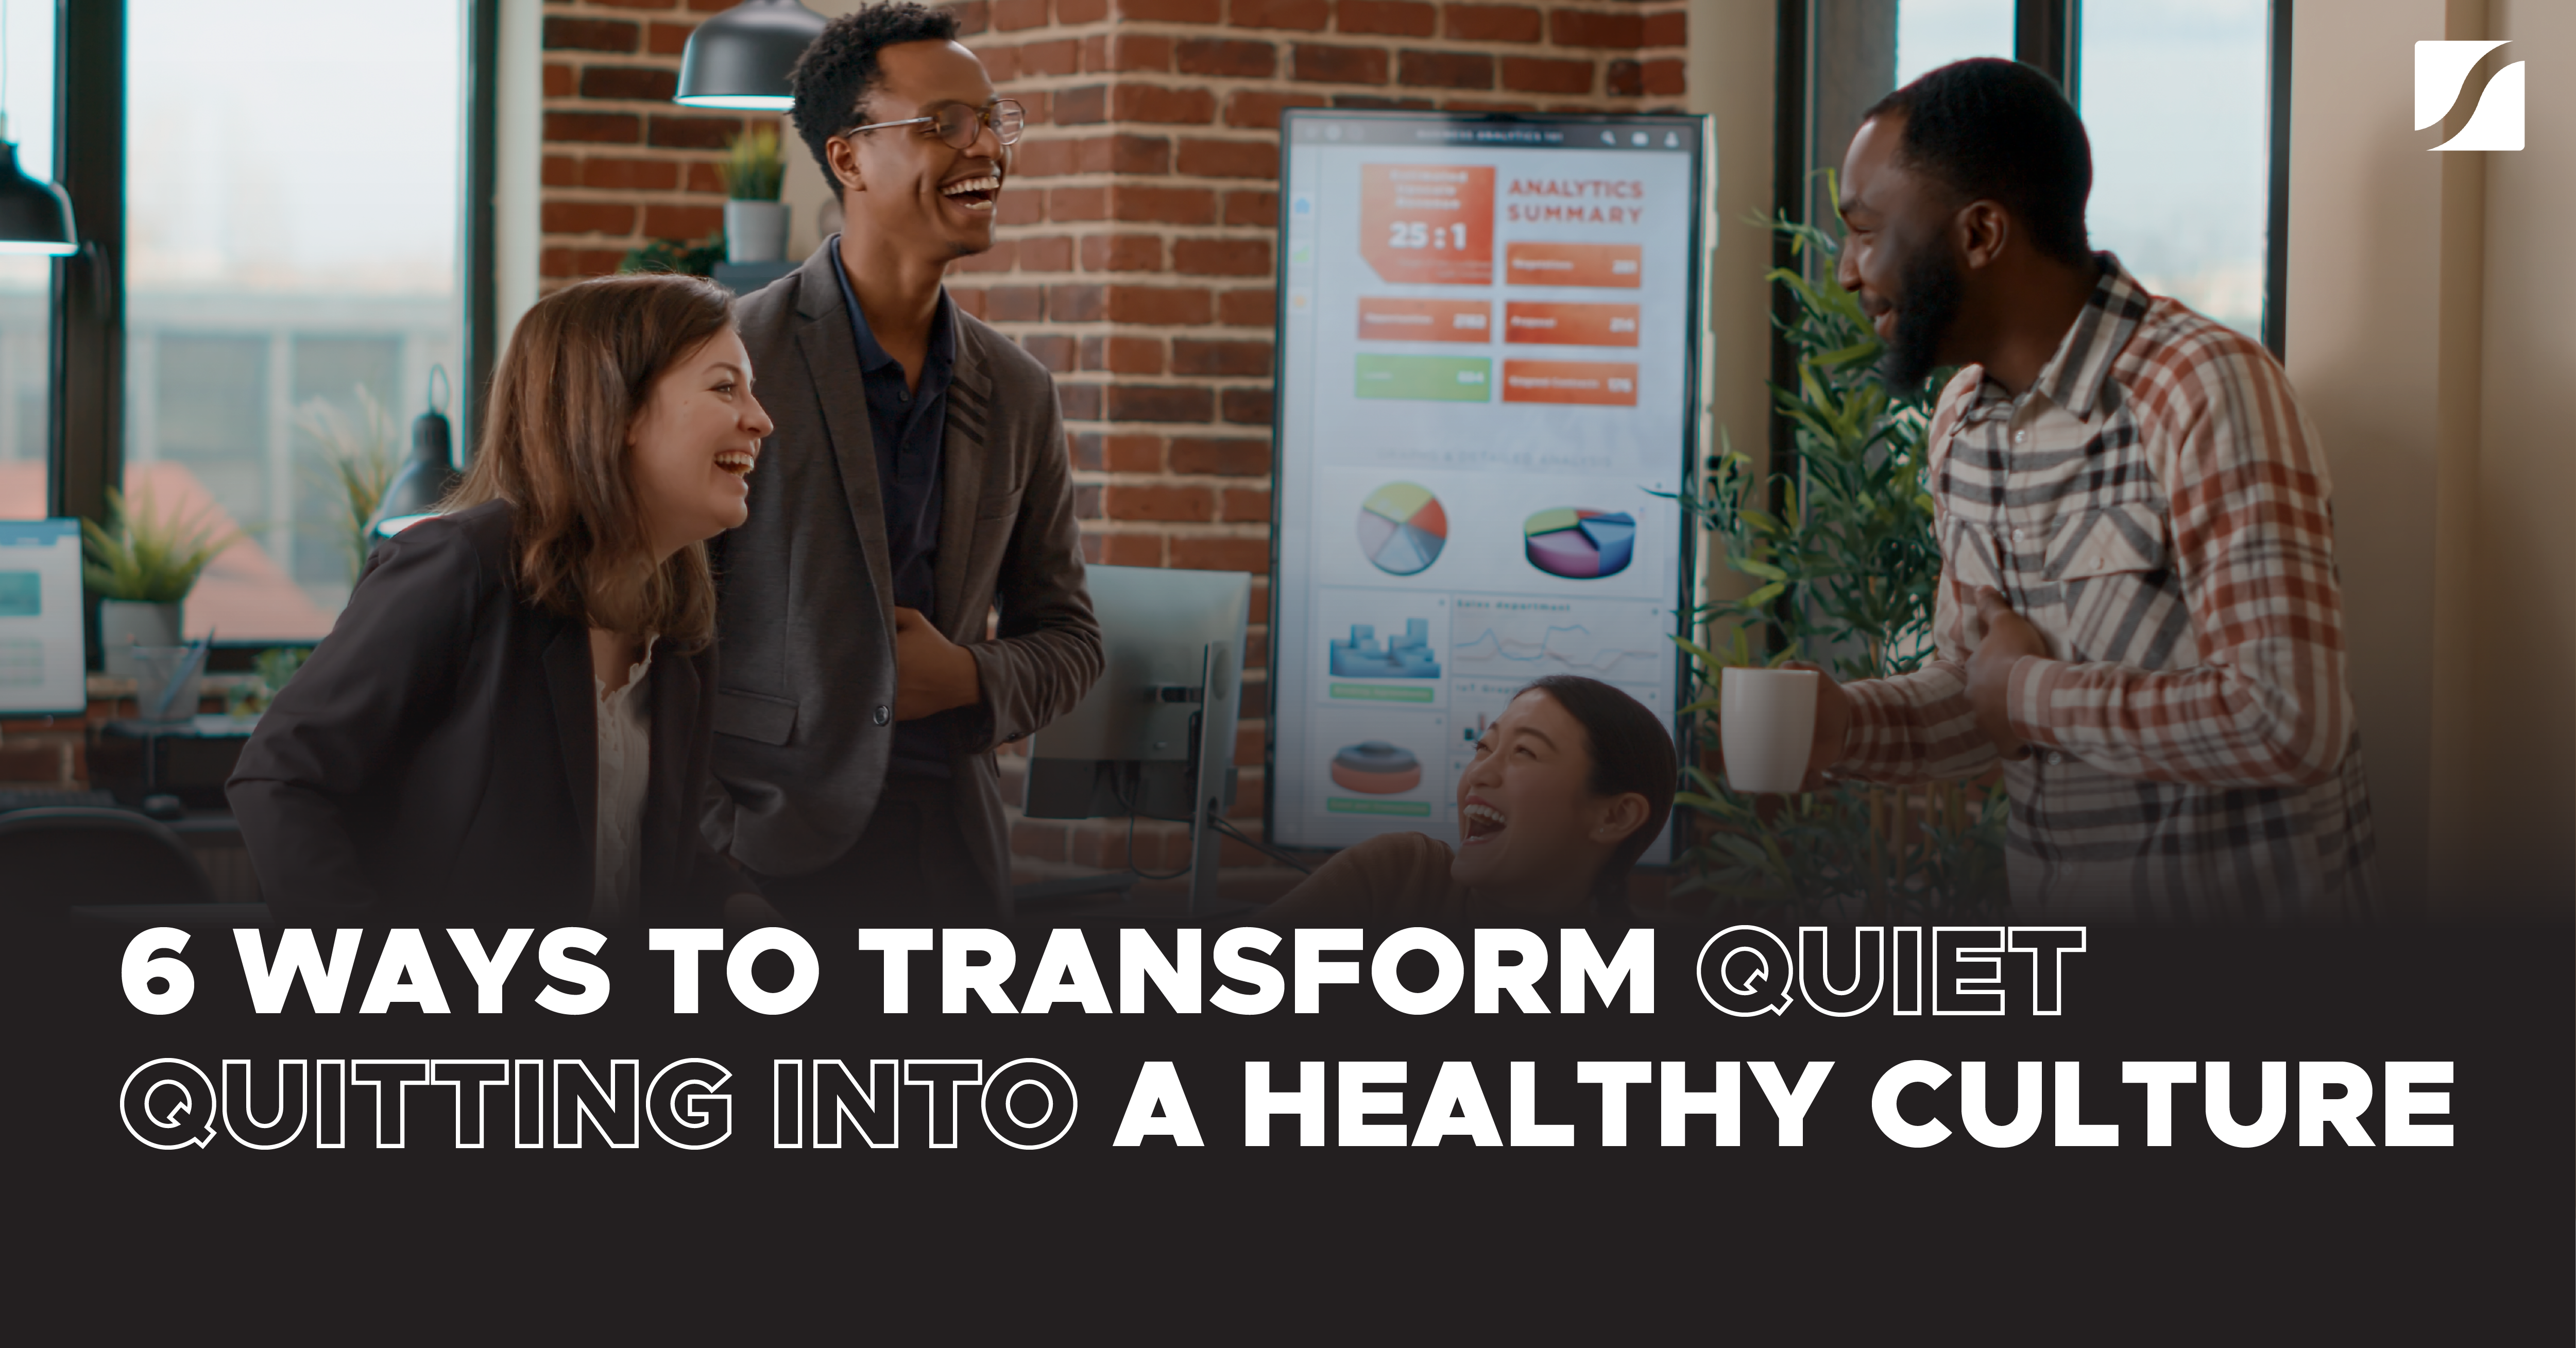 Meta image2_6 WAYS TO TRANSFORM QUIET QUITTING INTO A HEALTHY CULTURE